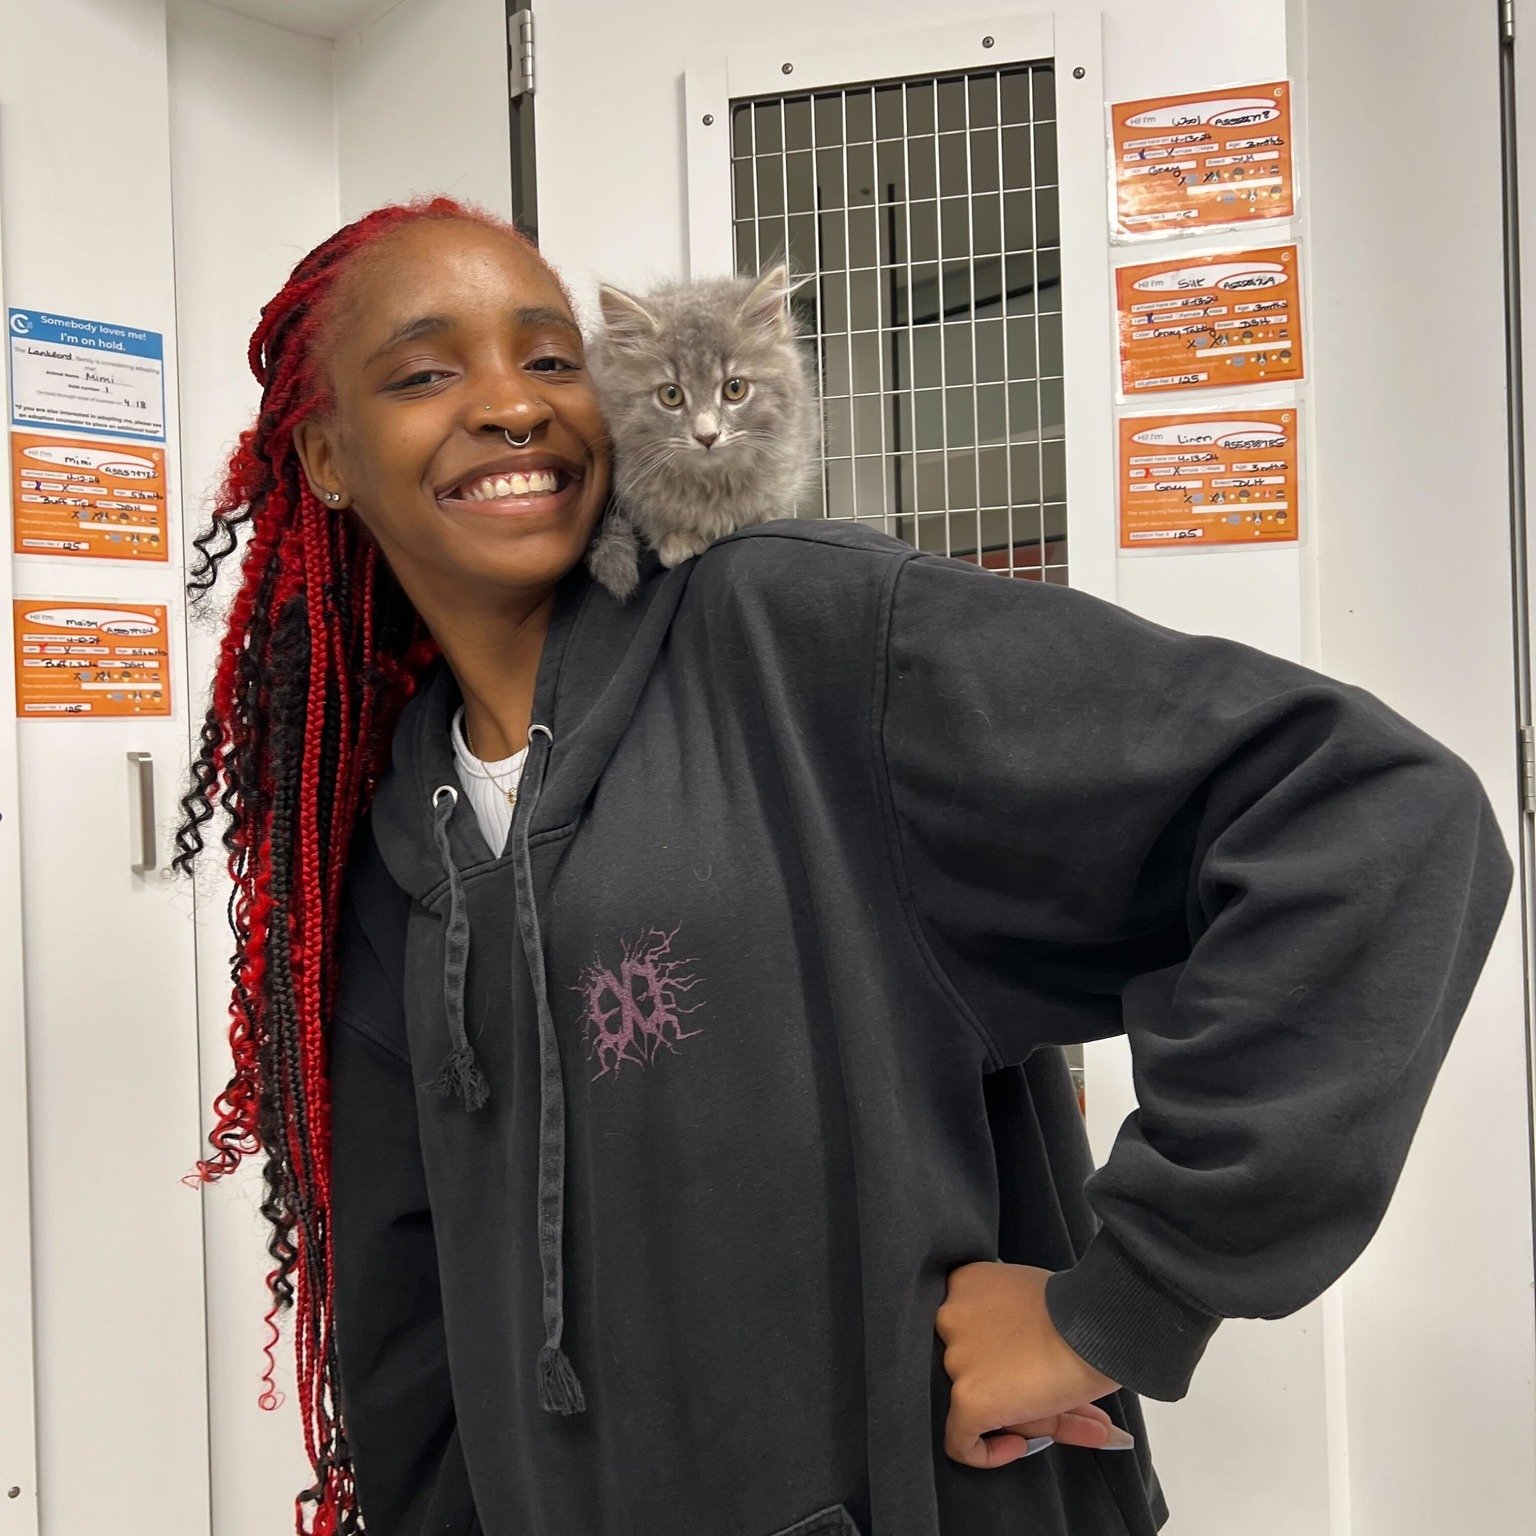 Congratulations to the 53 animals who found new homes last week! Three cheers for: Renesmee, J.K., Wool, Silk, Clover, HoneySuckle, Minx, Maisy, Mimi, Victoria, Mars, Bebe, Chi Chi, Daisy, Gem, Angel, Linen, Polly, Sylvester, Kitty, Bill, Todd, Natas